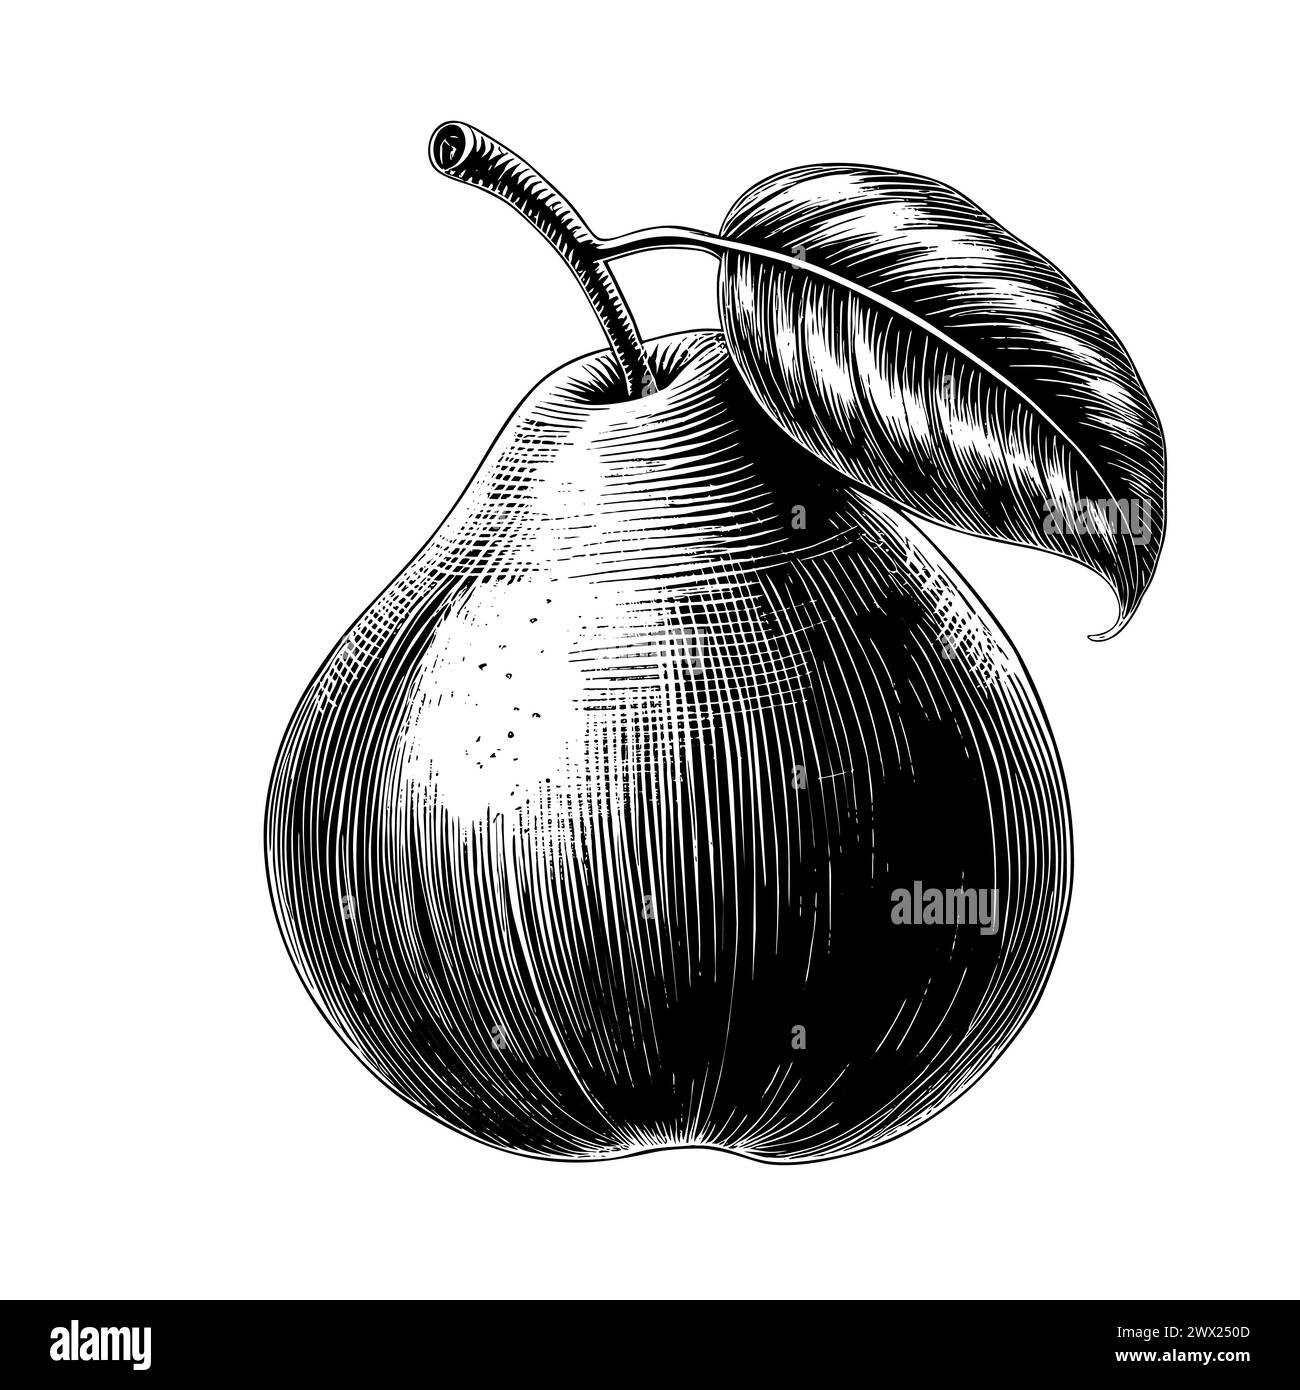 Pear engraving hand drawn isolated fruit Stock Vector